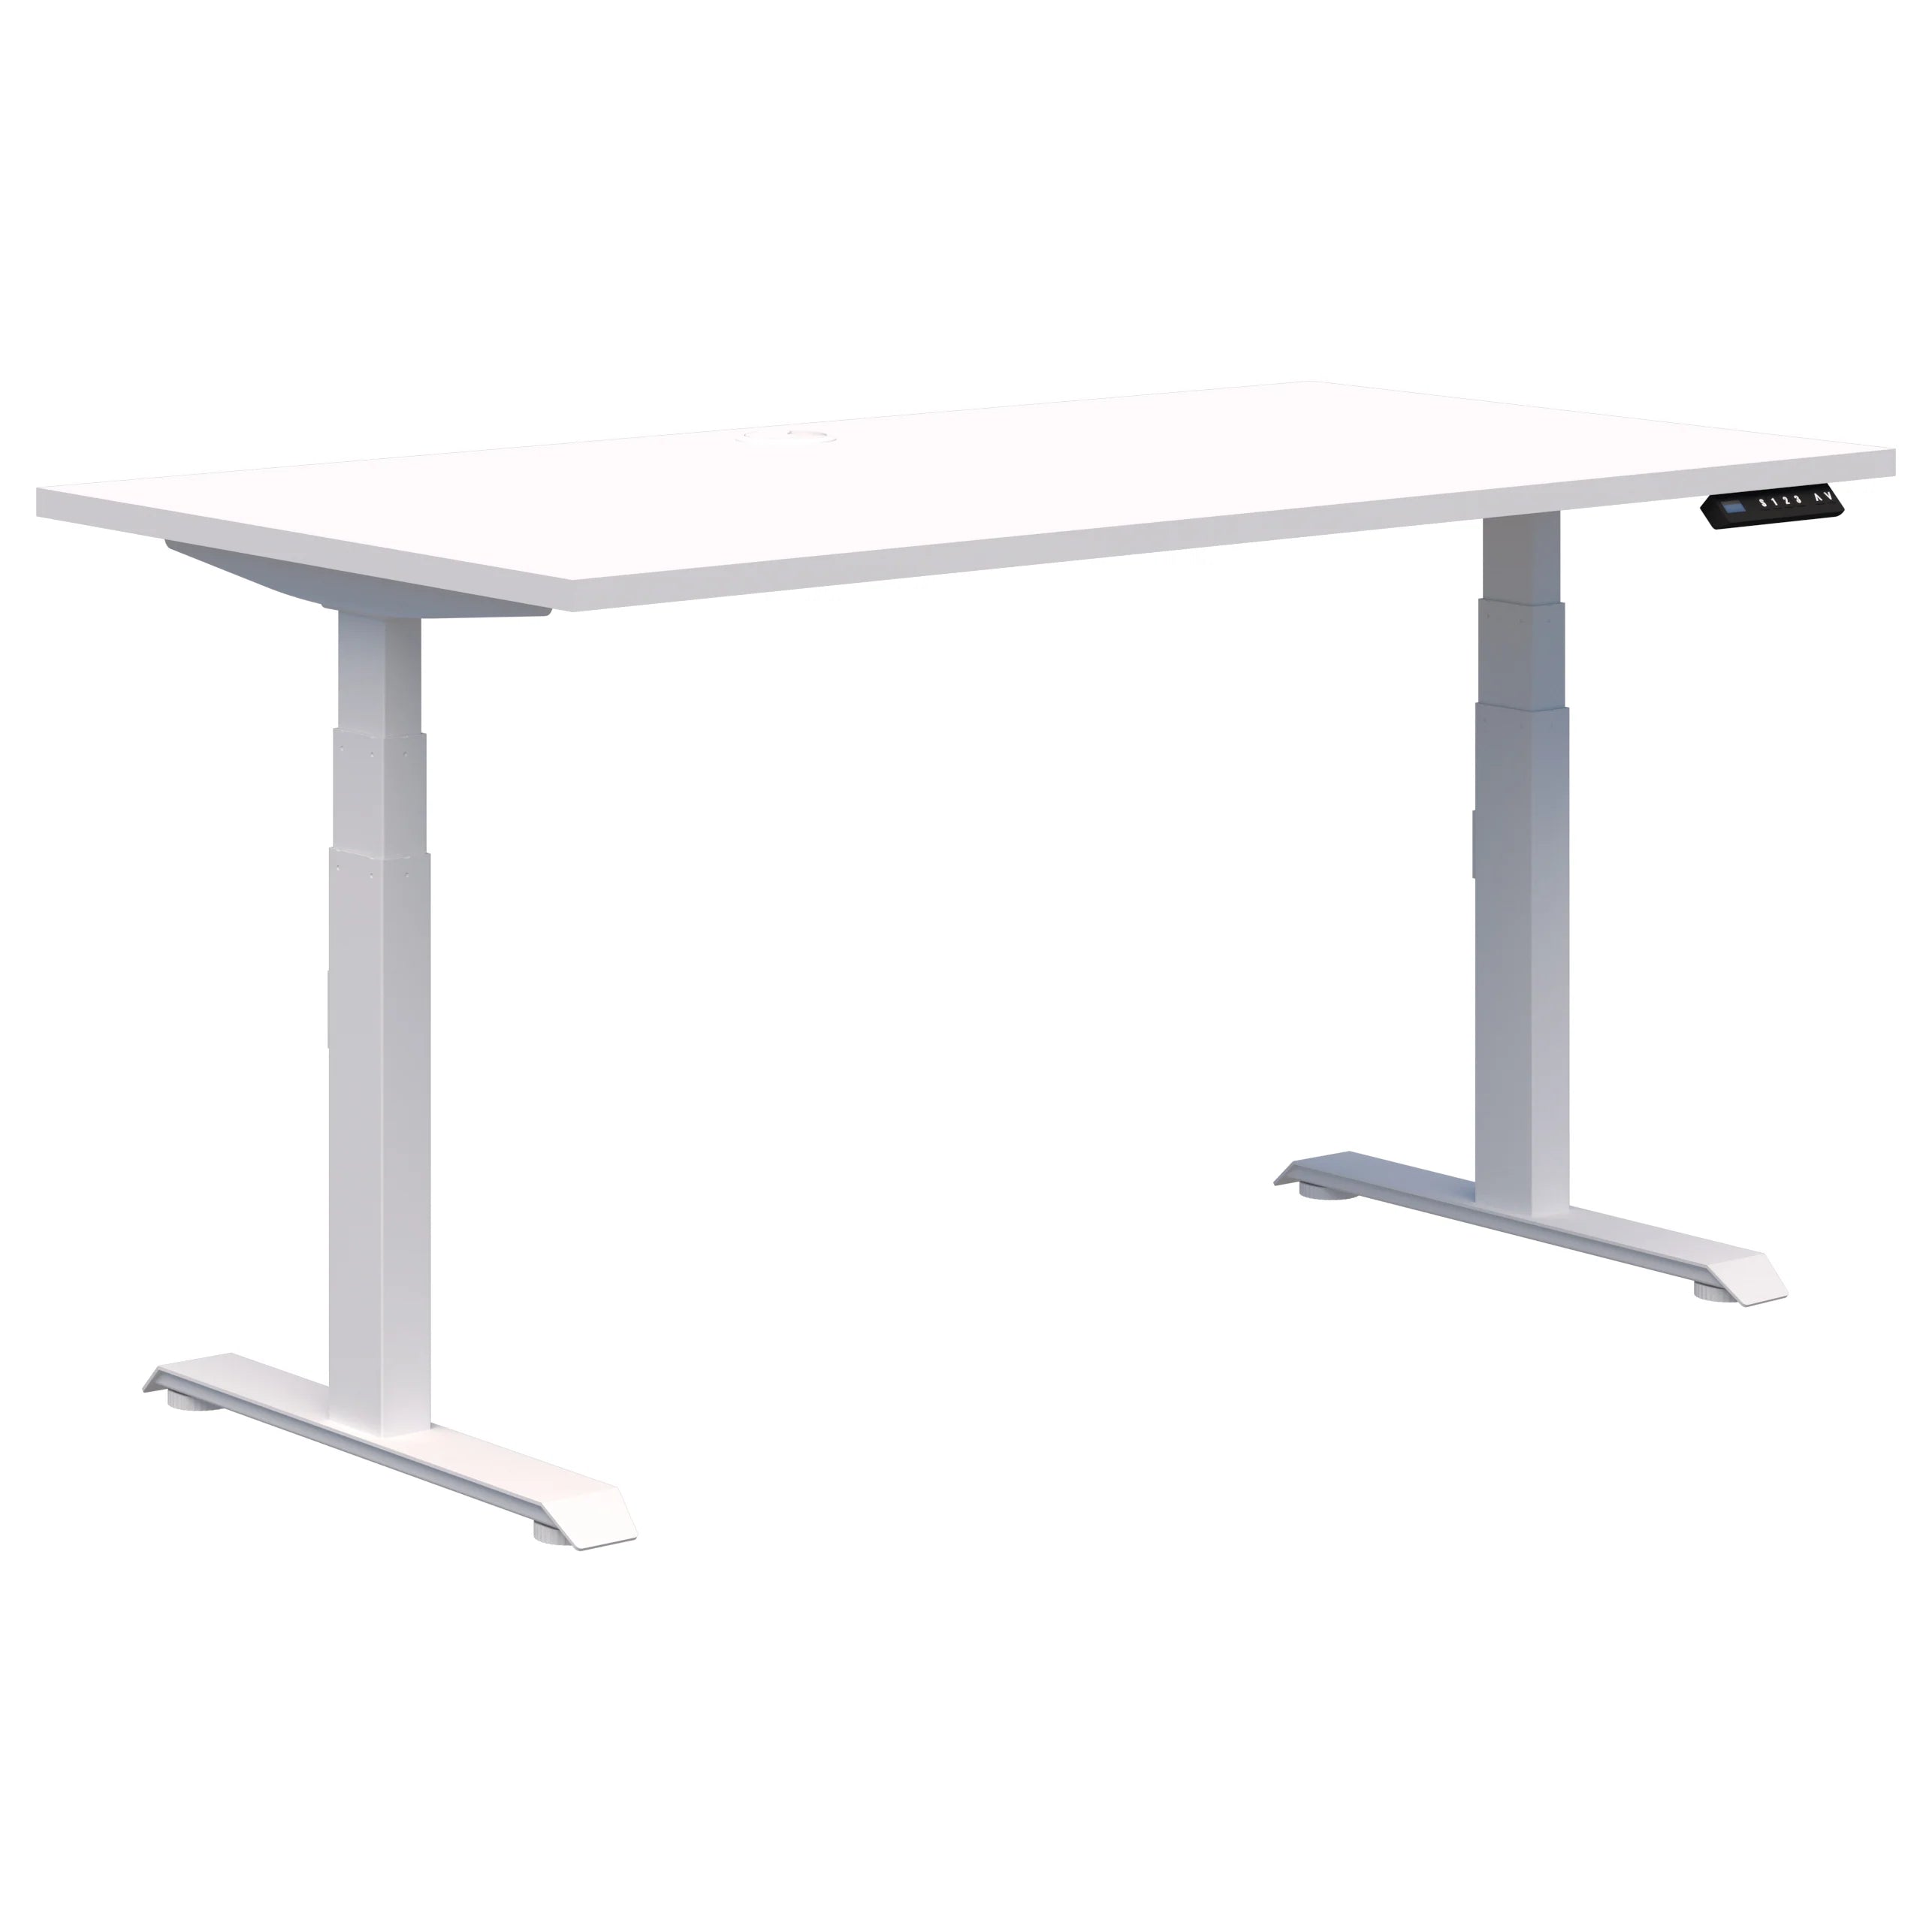 Summit electric height adjustable office desk with white frame and snow velvet white top.